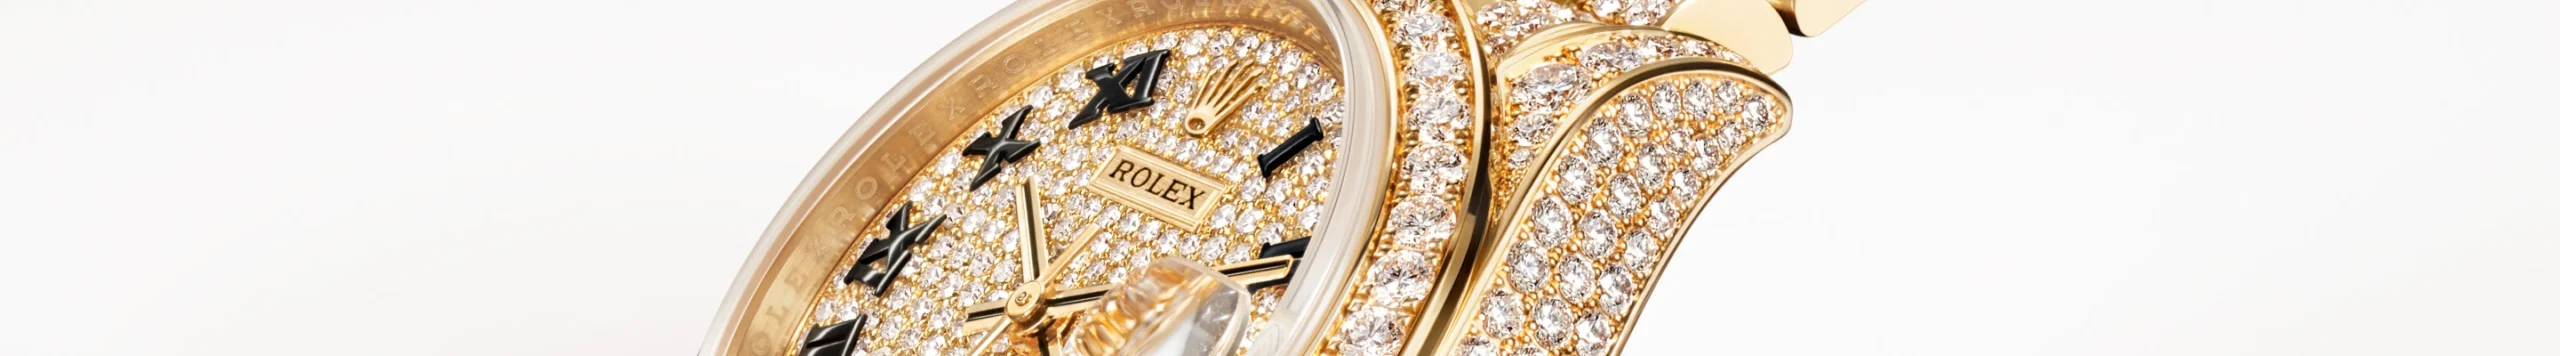 Rolex Lady-Datejust - NGG Timepieces | Rolex Official Retailer